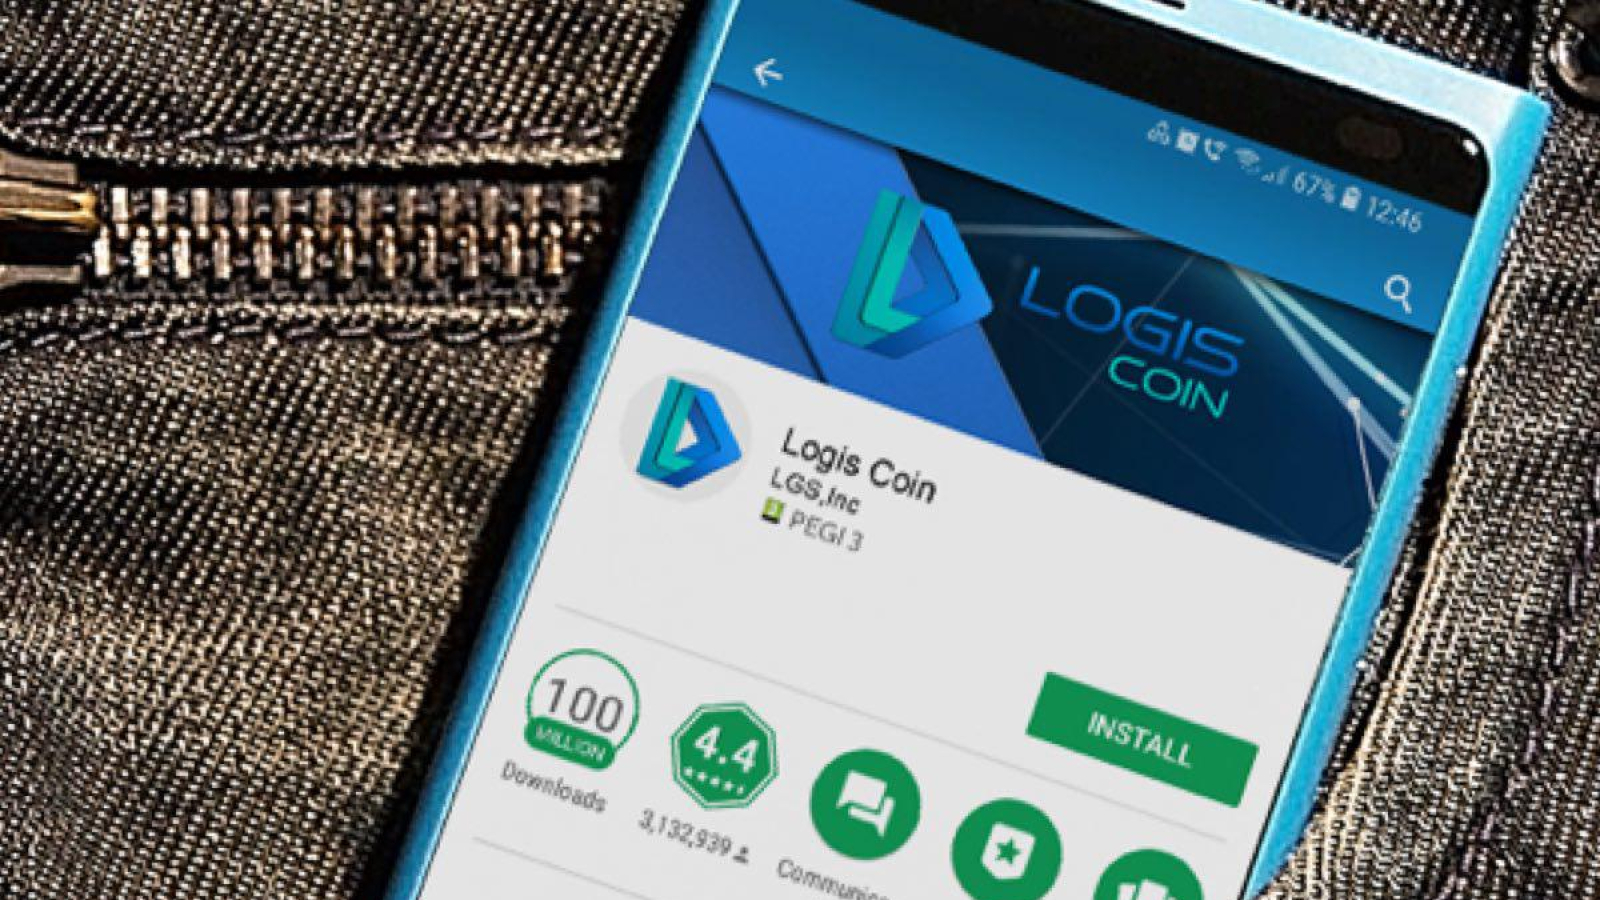 Logis Coin's wallets